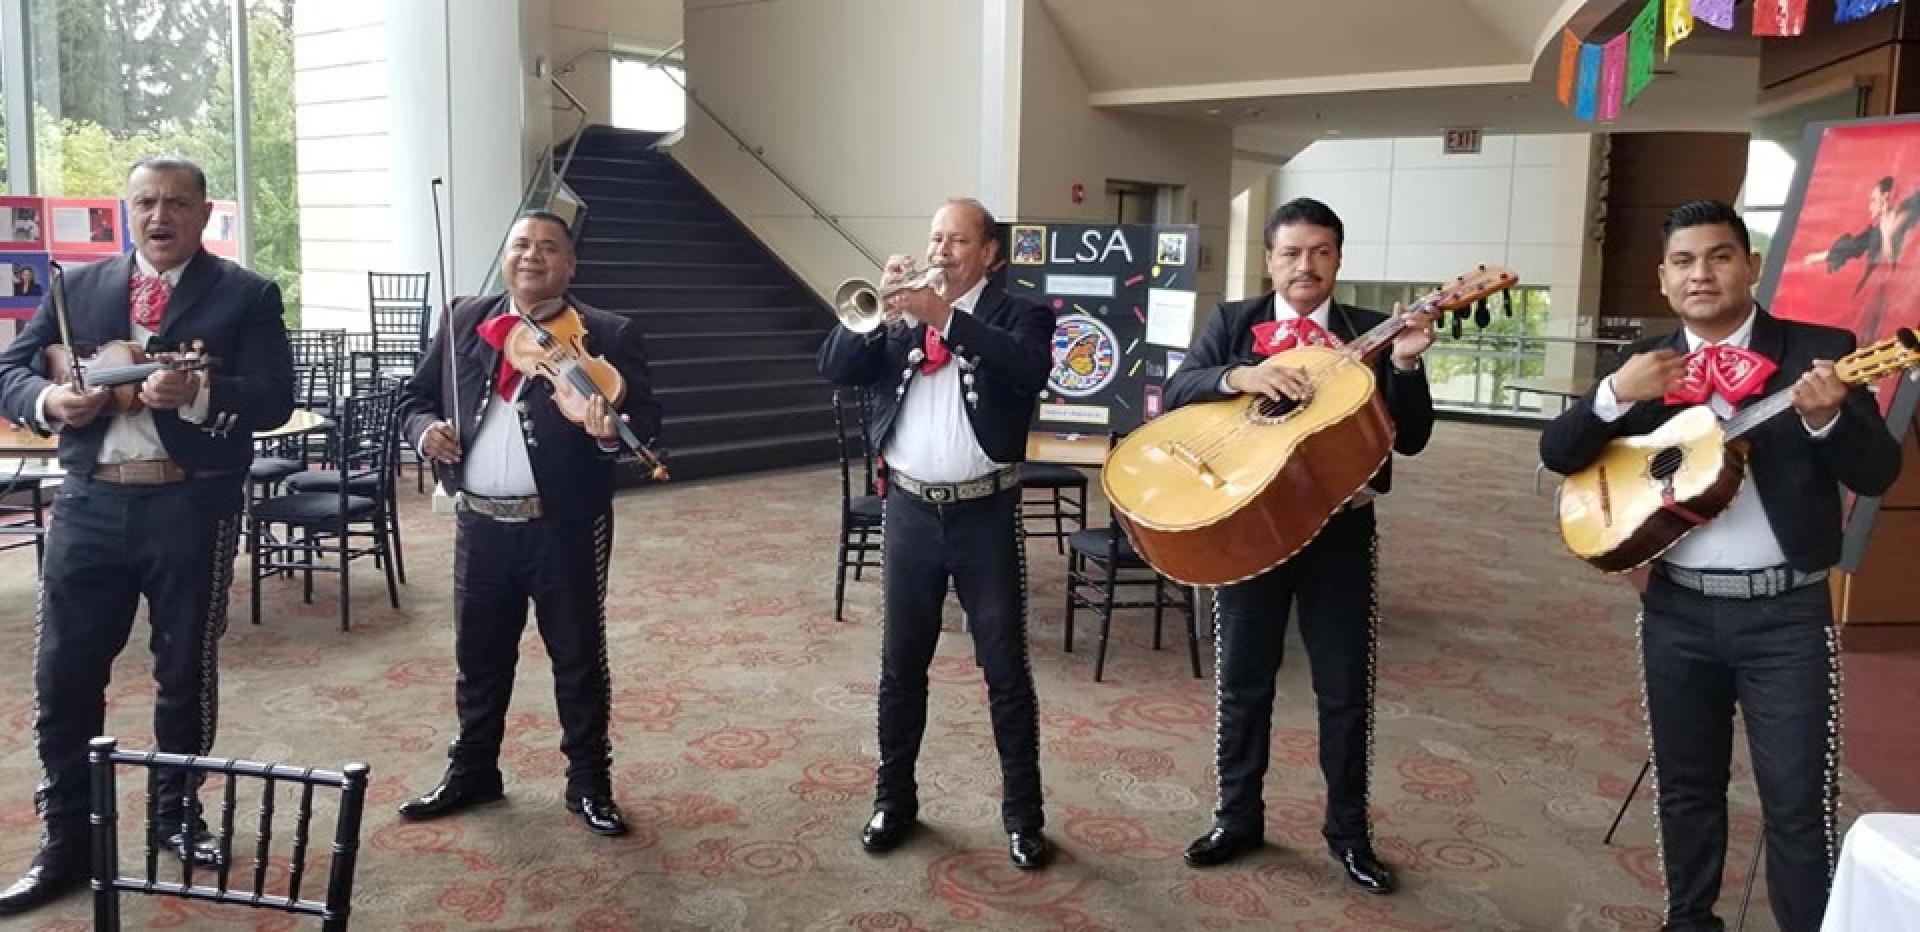 A mariachi band performing as part of Hispanic Heritage Month at North Central College.